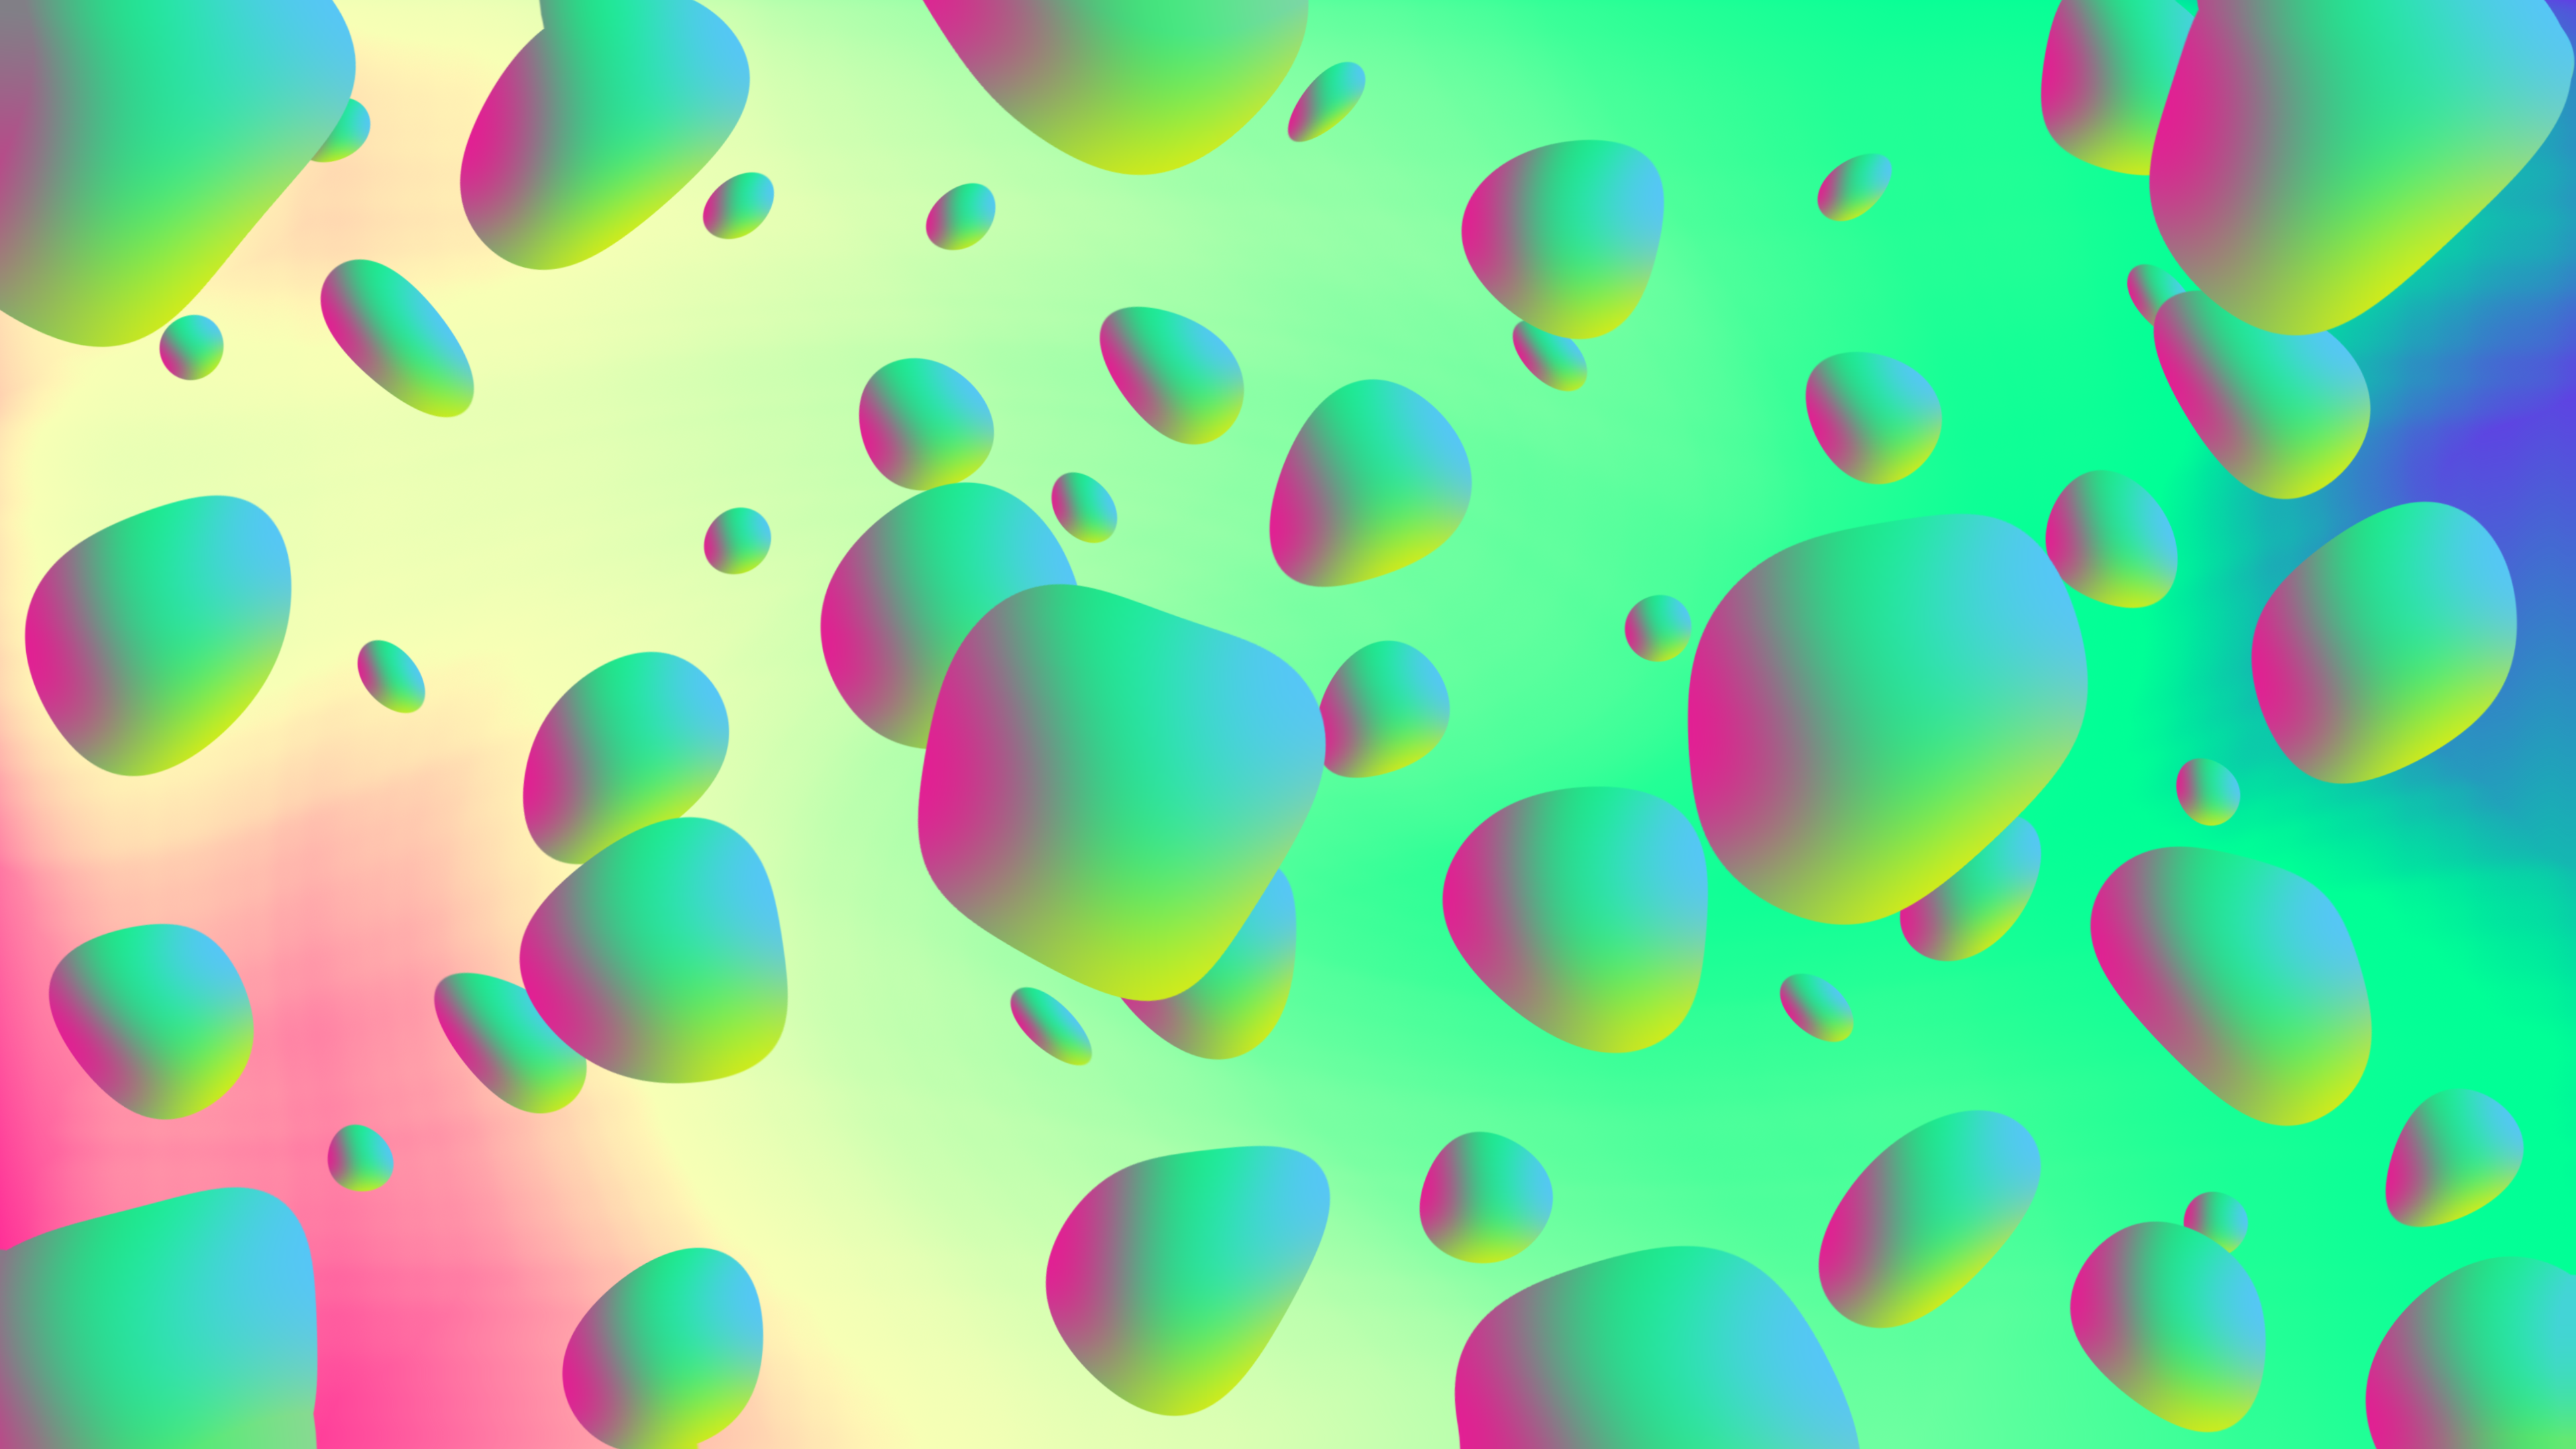 General 3840x2160 abstract bubbles colorful green purple digital art